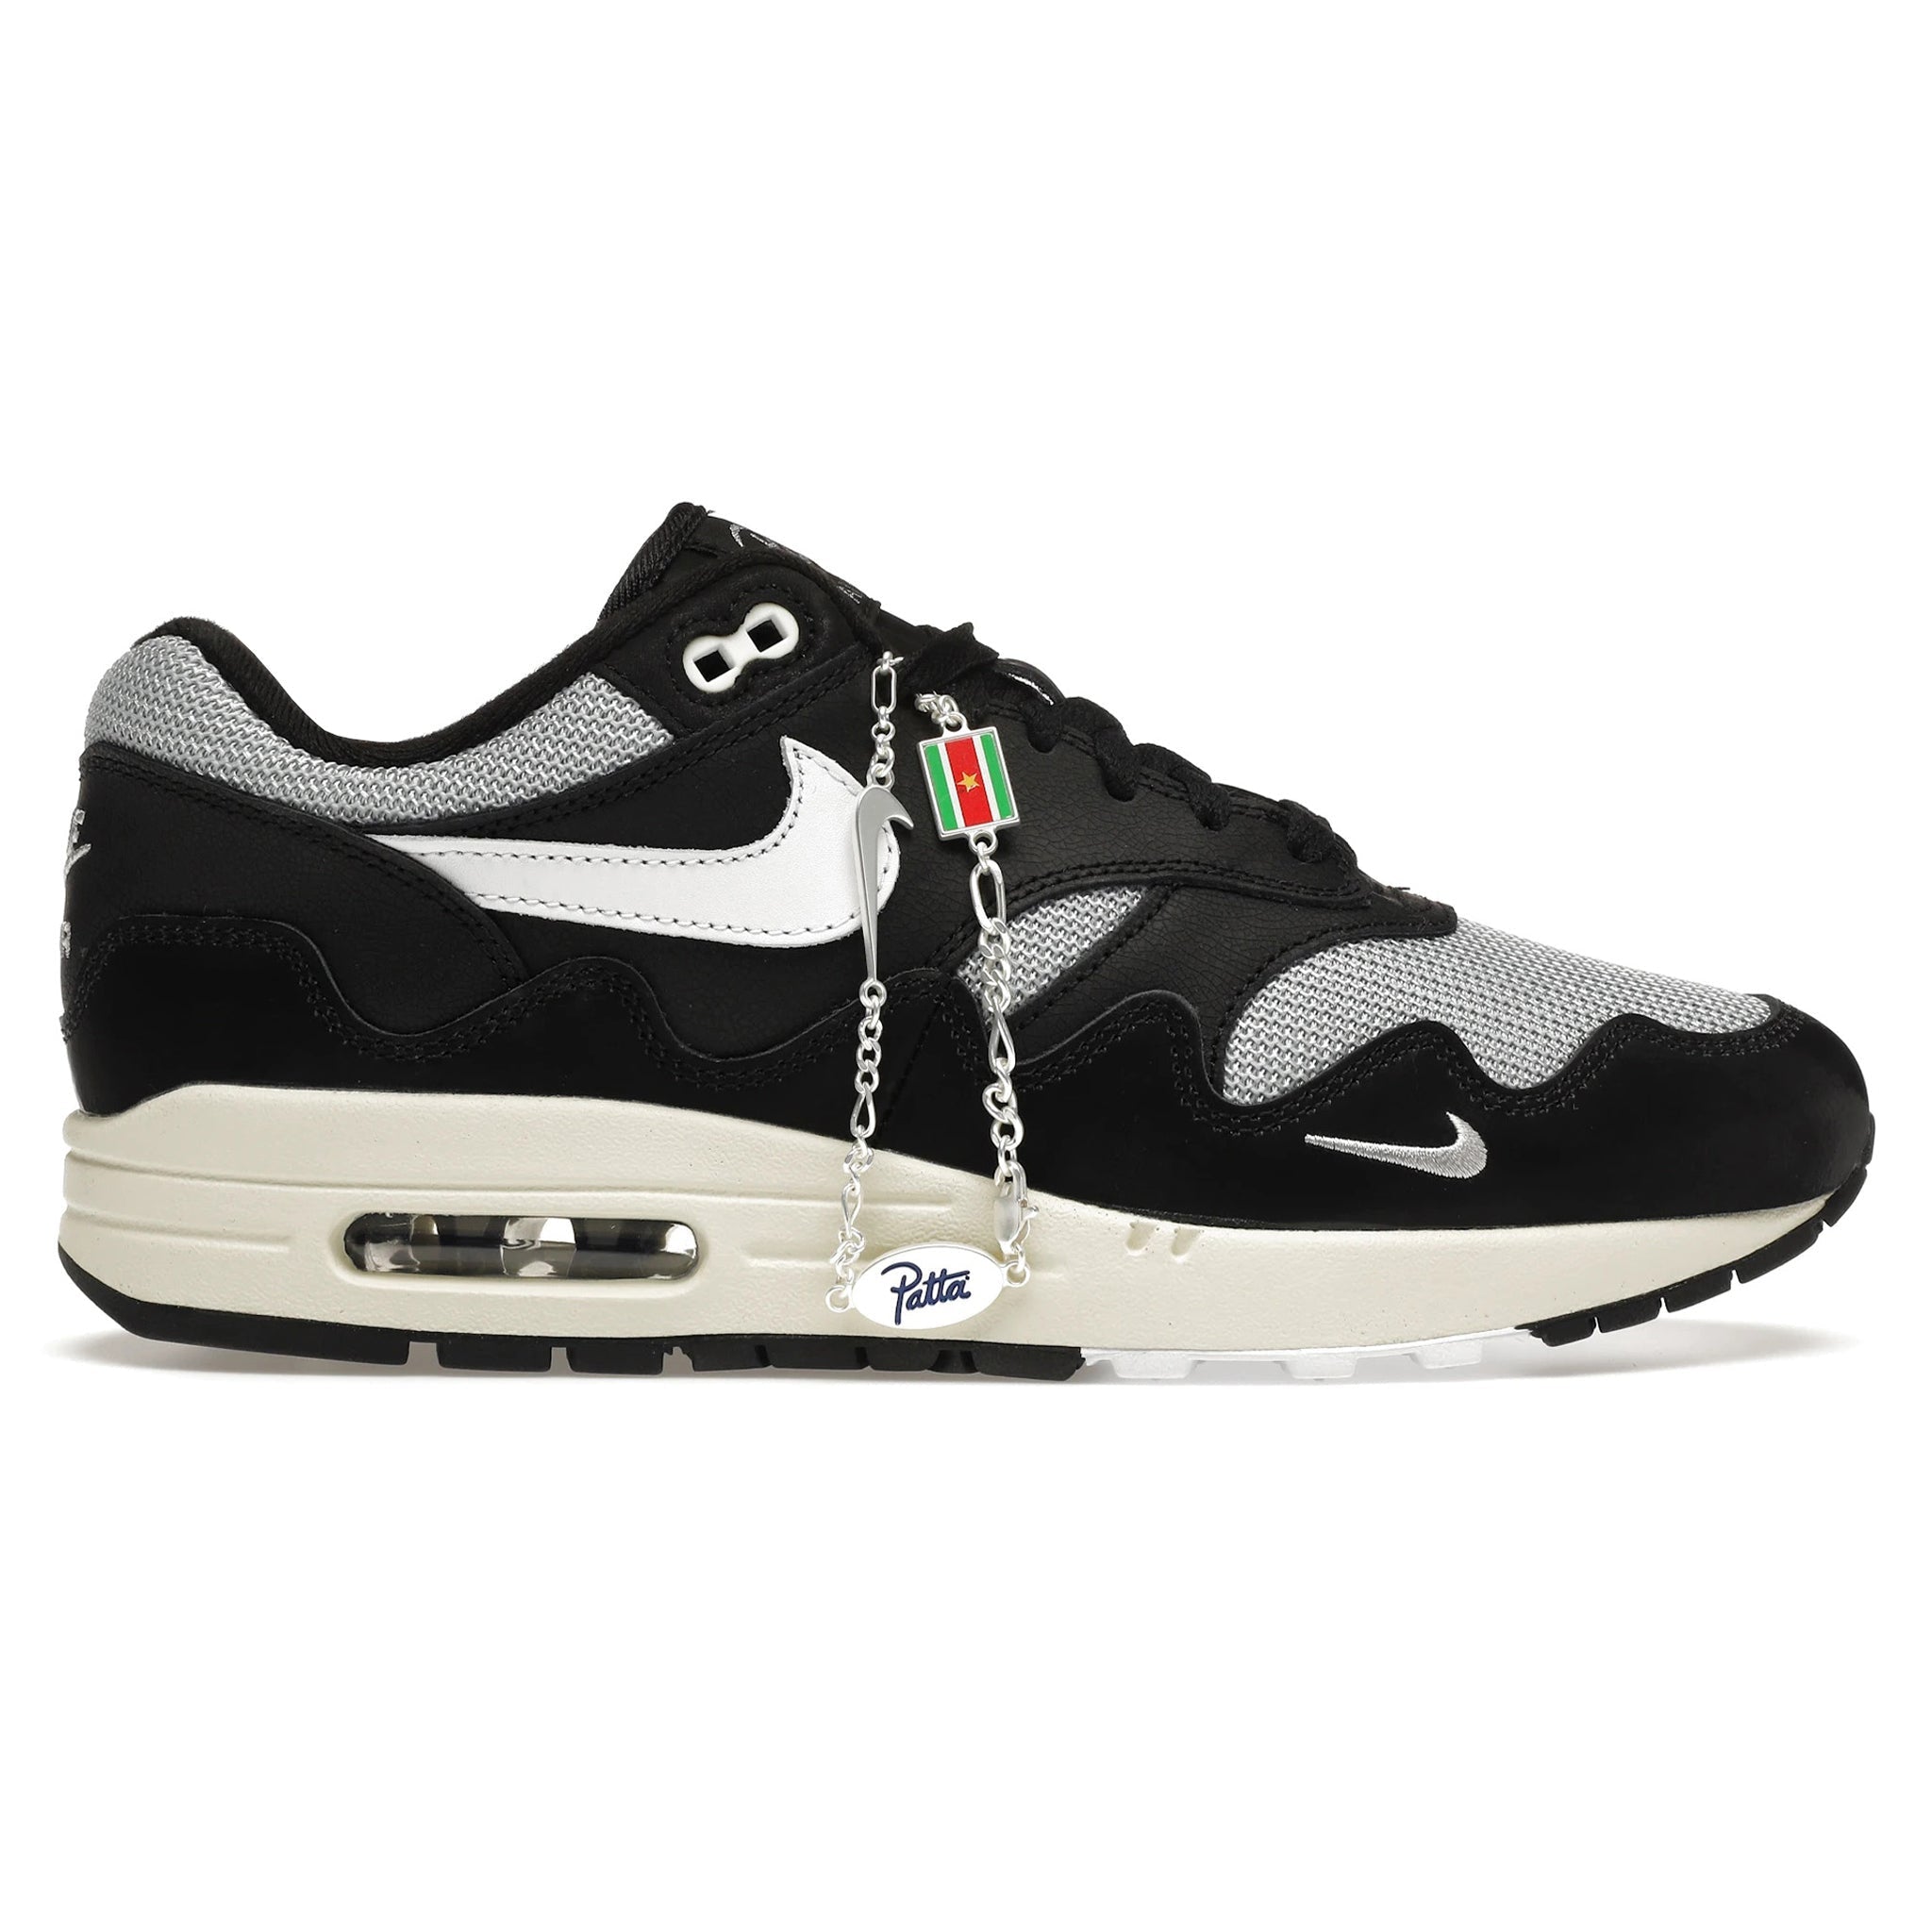 Nike Air Max 1 Patta Waves Black for Sale, Authenticity Guaranteed